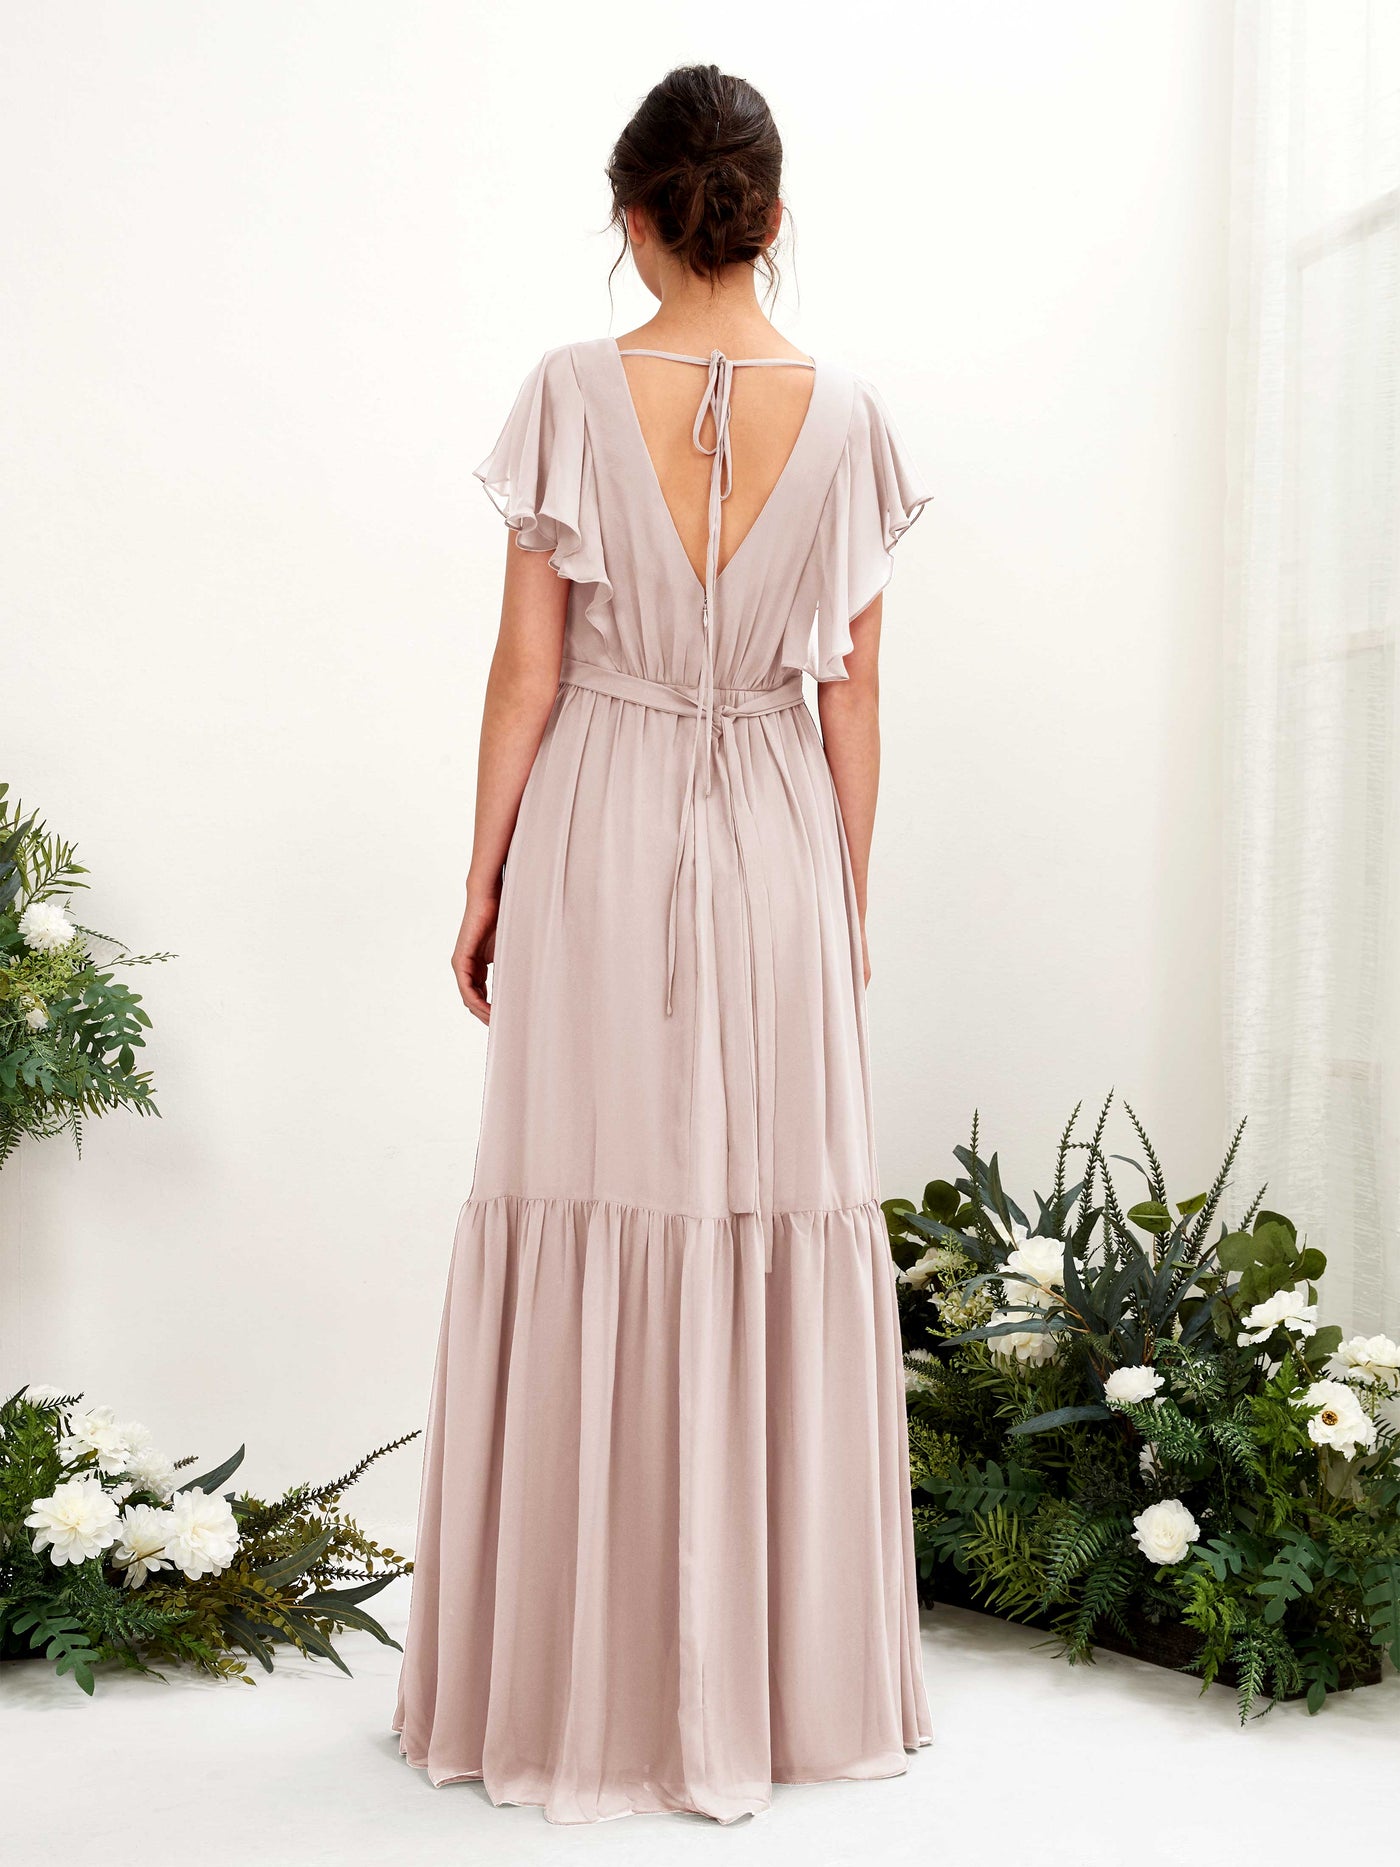 Biscotti Bridesmaid Dresses Bridesmaid Dress A-line Chiffon V-neck Full Length Short Sleeves Wedding Party Dress (81225935)#color_biscotti